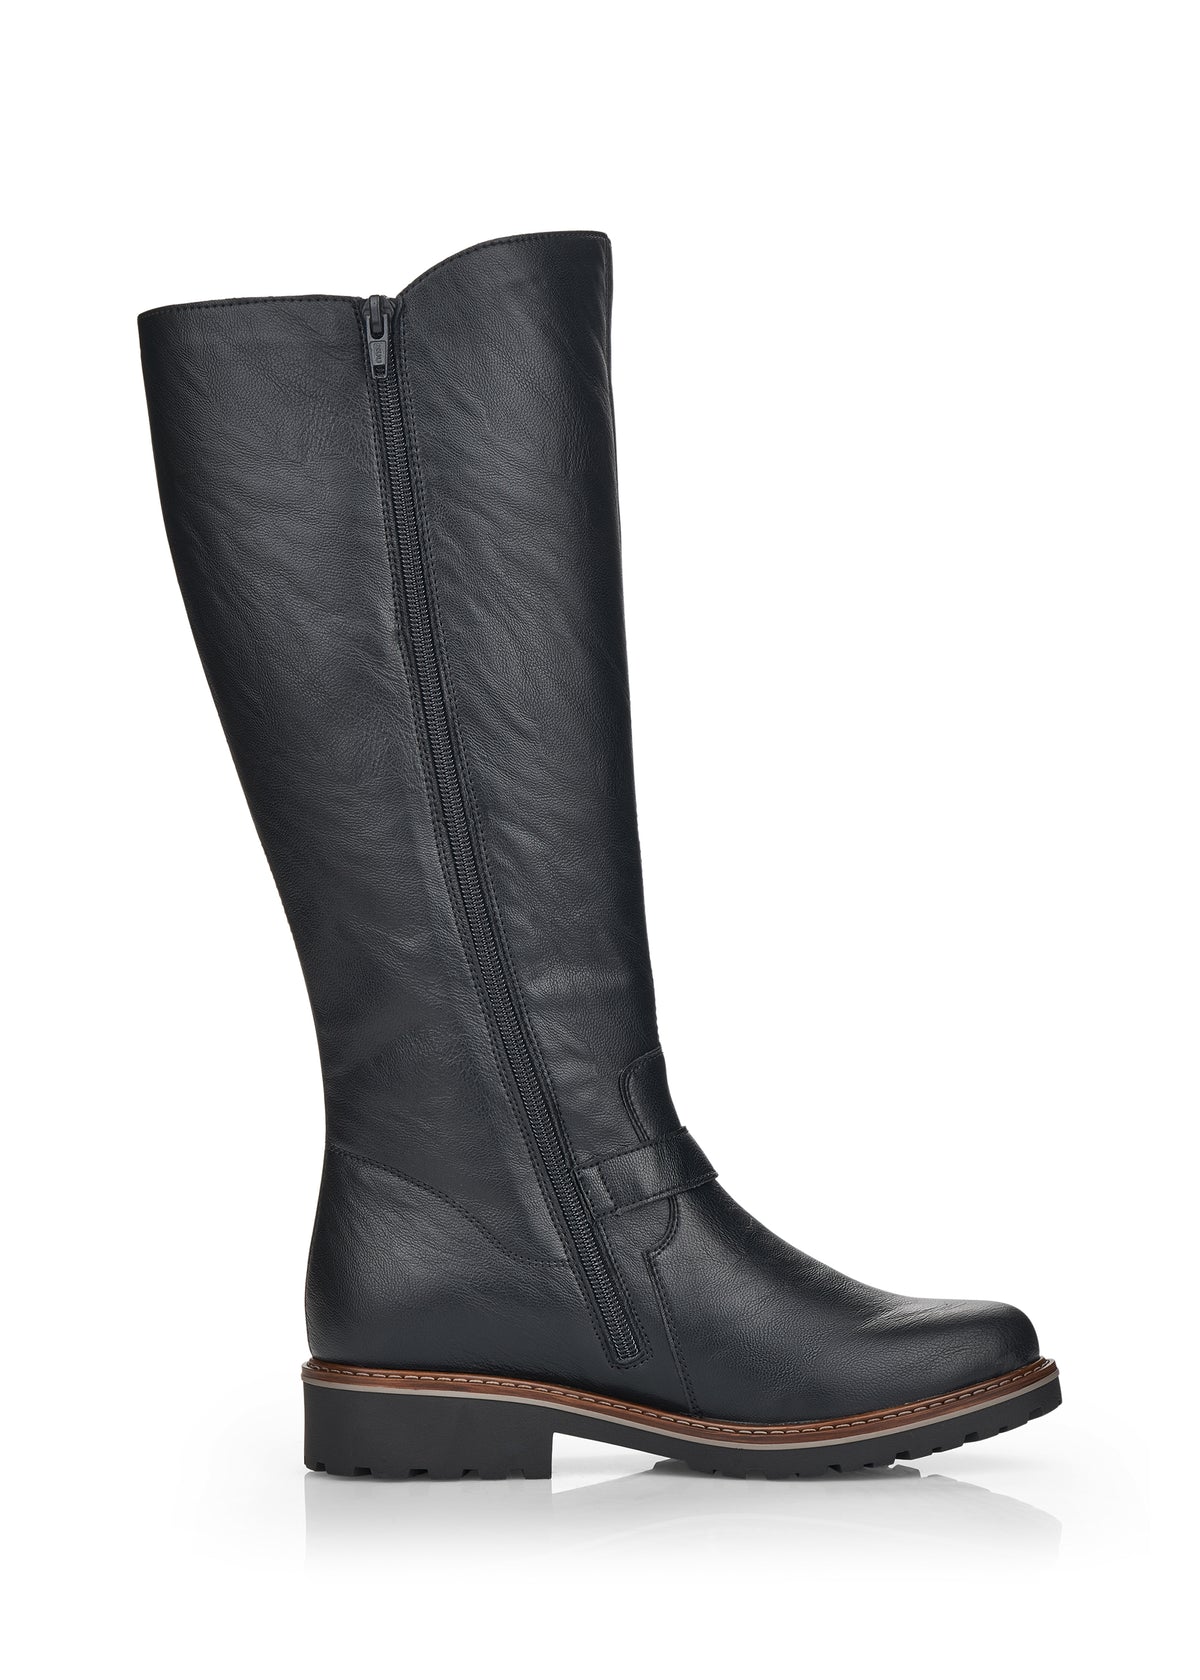 Boots with a warm lining - black, buckle decorations, L-XL shaft